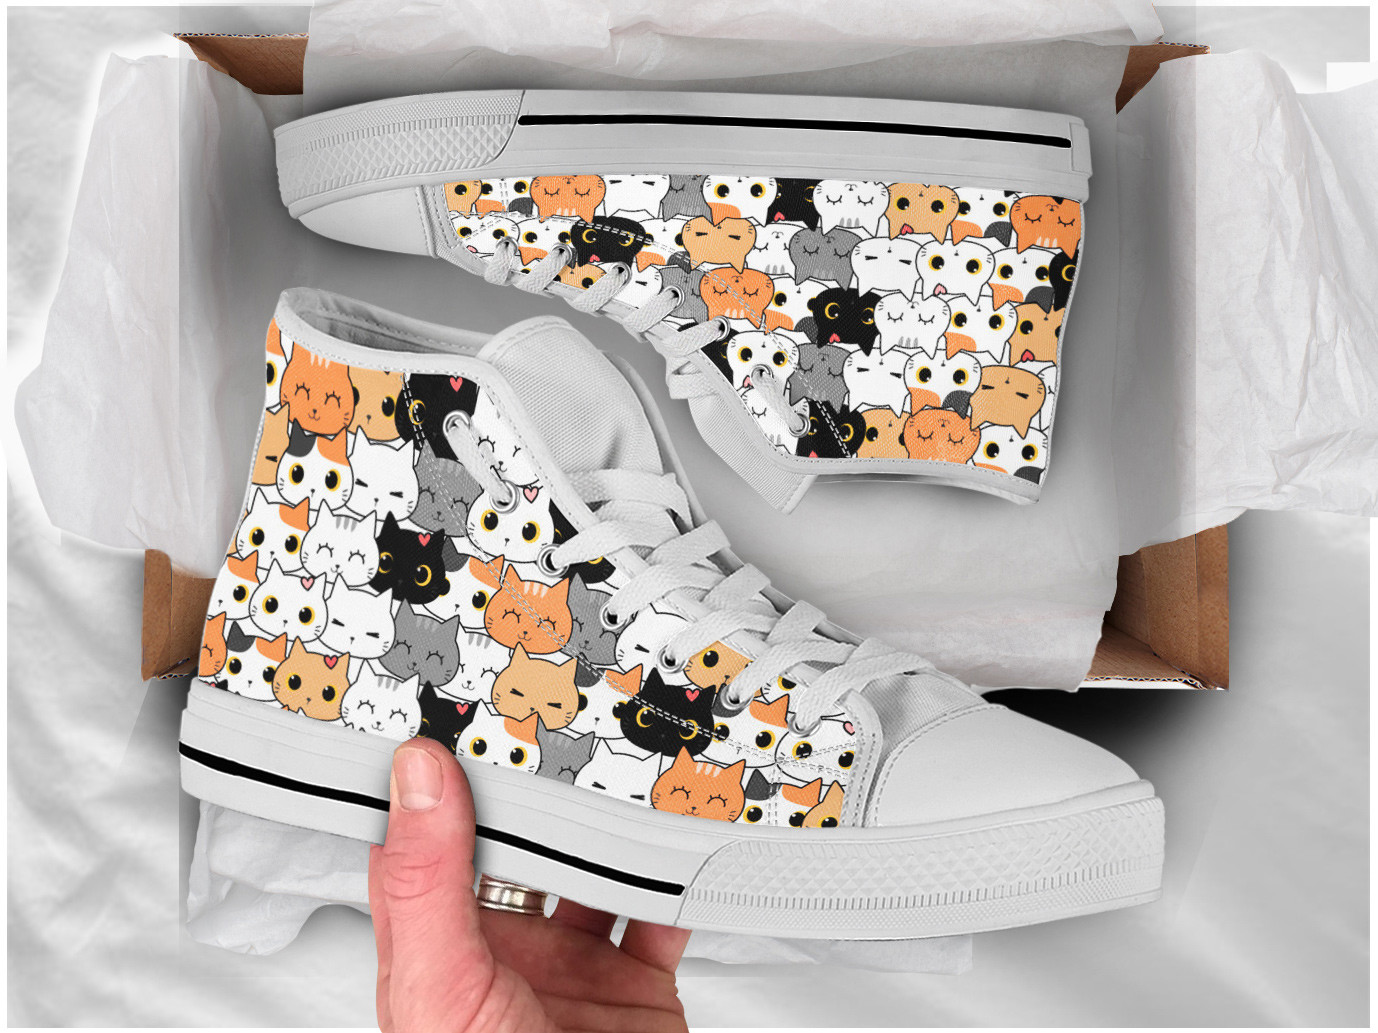 Cute Cats Shoes | Custom High Top Sneakers For Kids & Adults